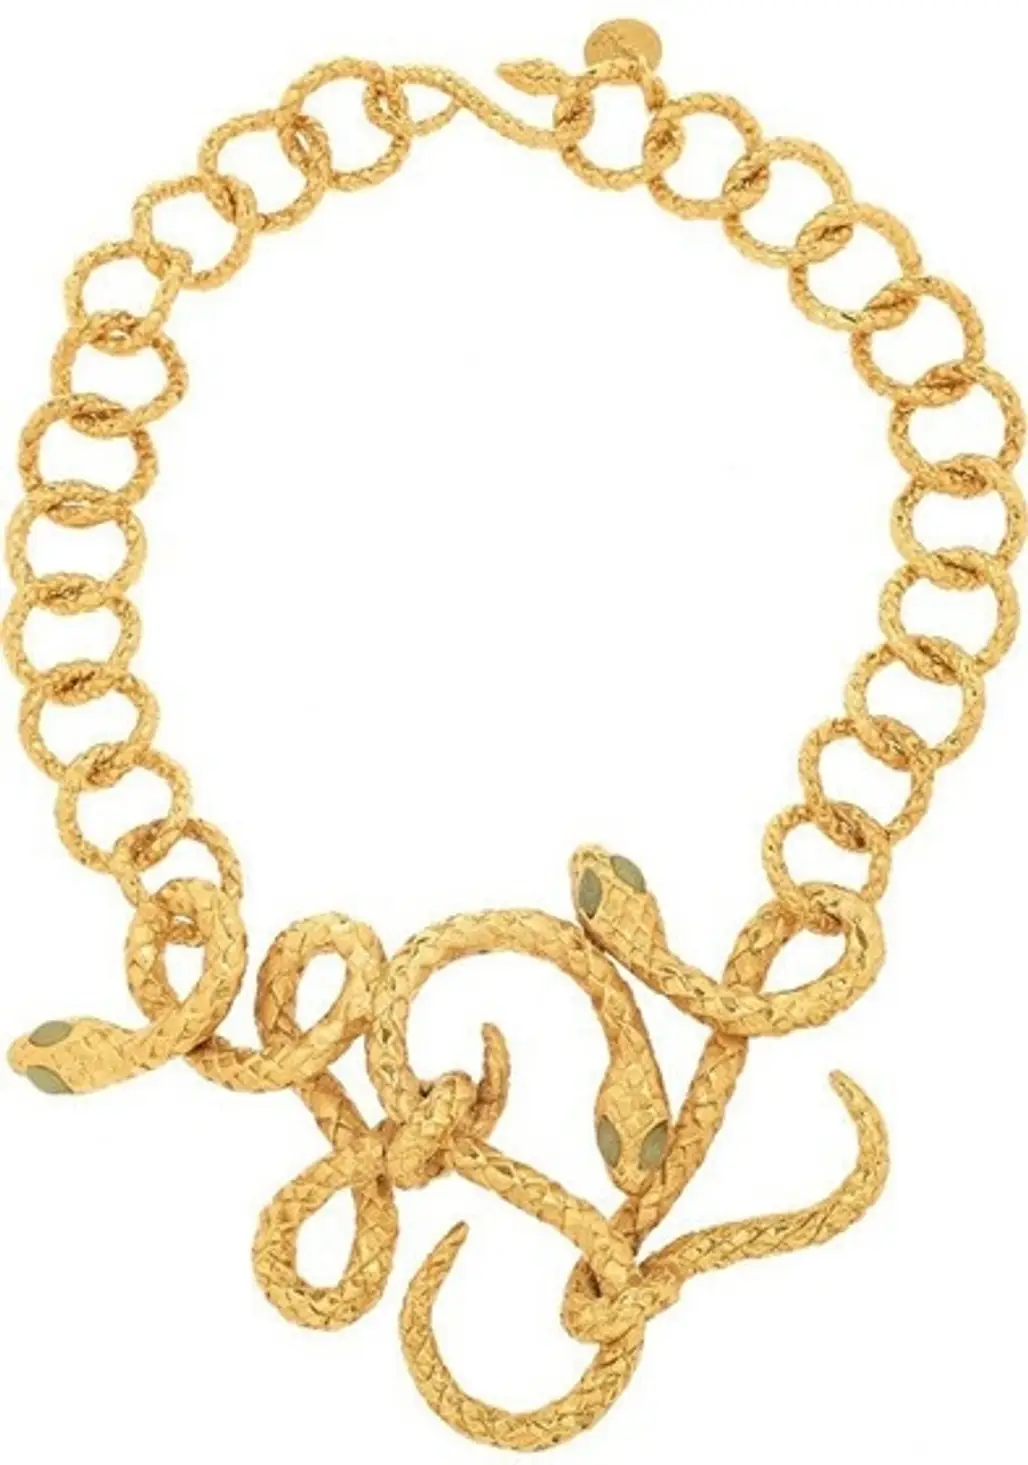 Yves Saint Laurent Gold-Plated Jade Serpent Necklace